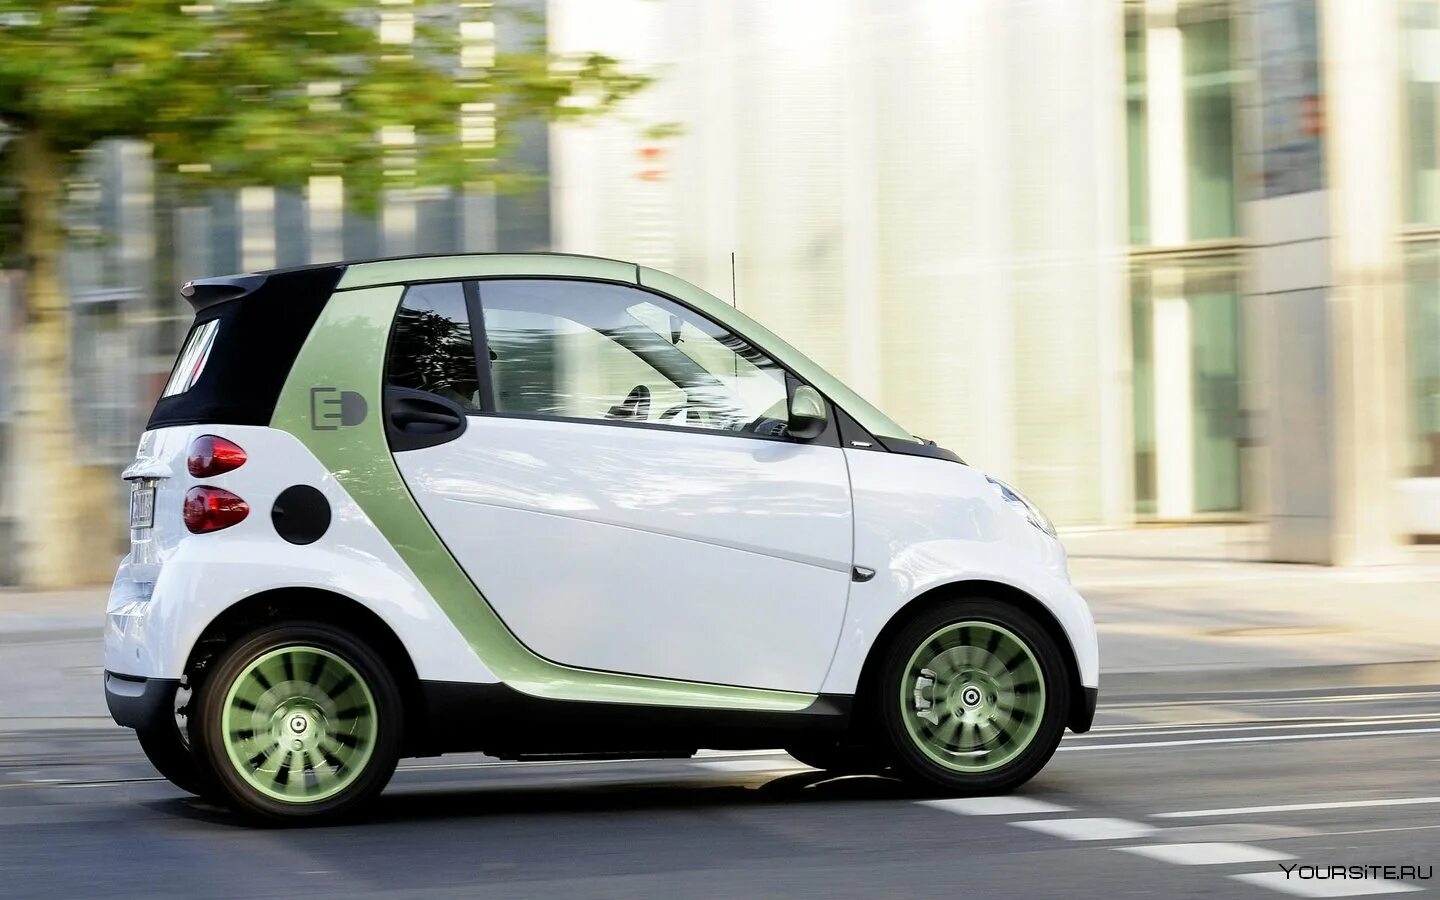 Электро мал. Smart Fortwo Electric Drive. Smart car электромобиль. Электромобиль Byvin Electric car интерьер. Мерседес смарт 2010.